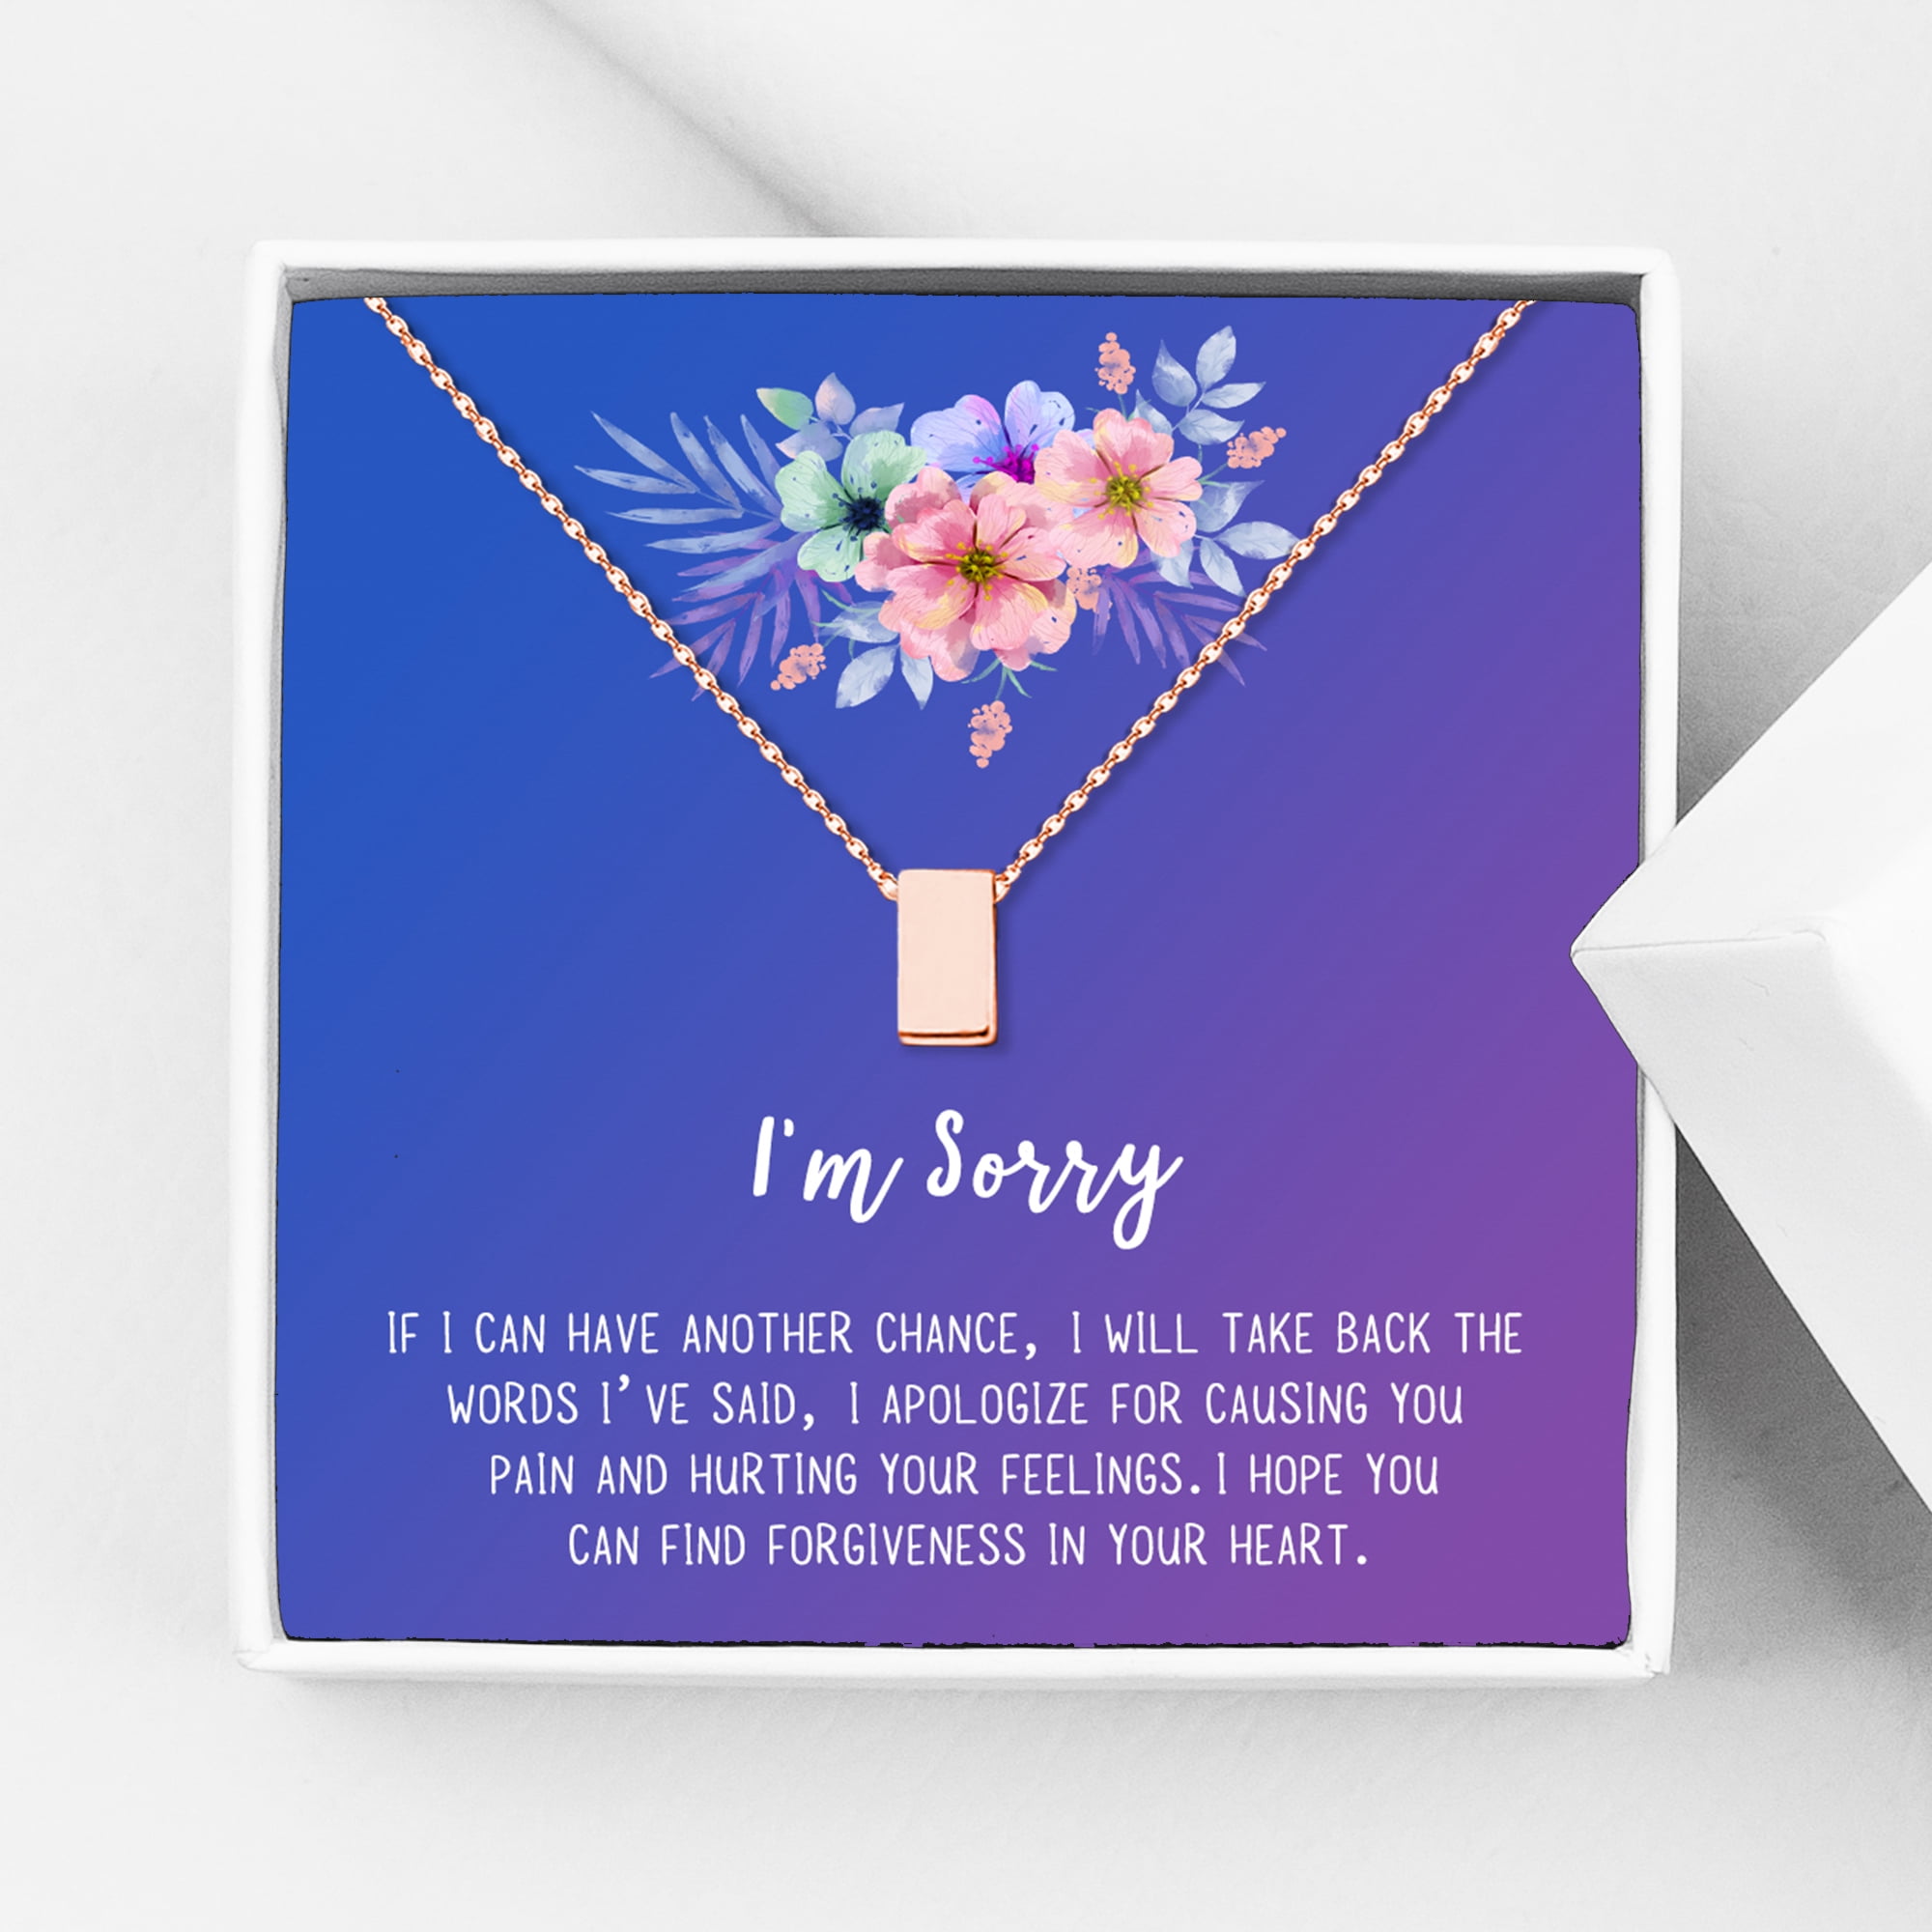 WIFE GIFT APOLOGY Gifts For Wife Soul Mate Necklace Amazing Wife Gift For wife Gift Box For Women Relationship Gifts Valentines Gift